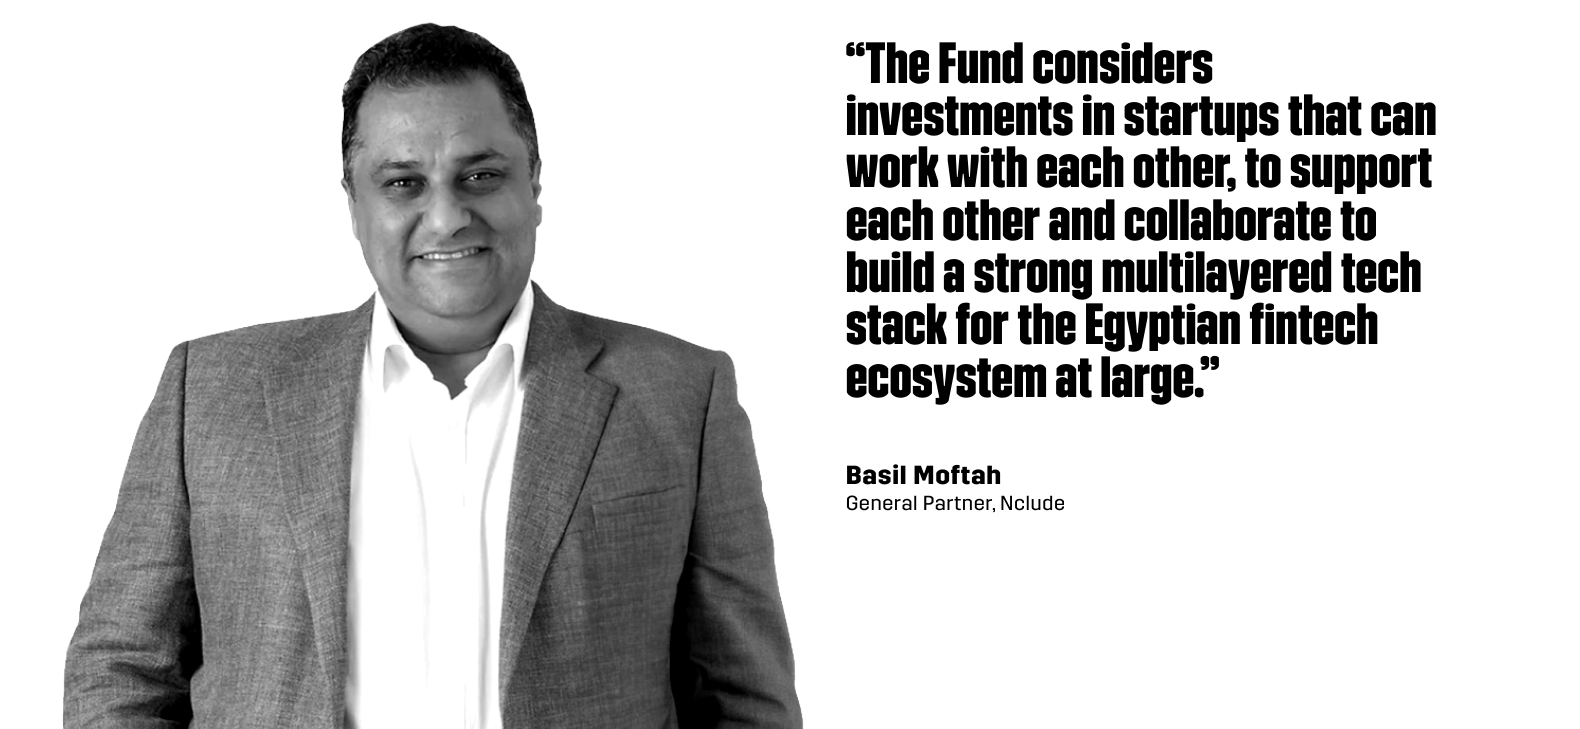 “The Fund considersinvestments in startups that canwork with each other, to supporteach other and collaborate tobuild a strong multilayered techstack for the Egyptian fintechecosystem at large.” - Basil Moftah, General Partner at Nclude